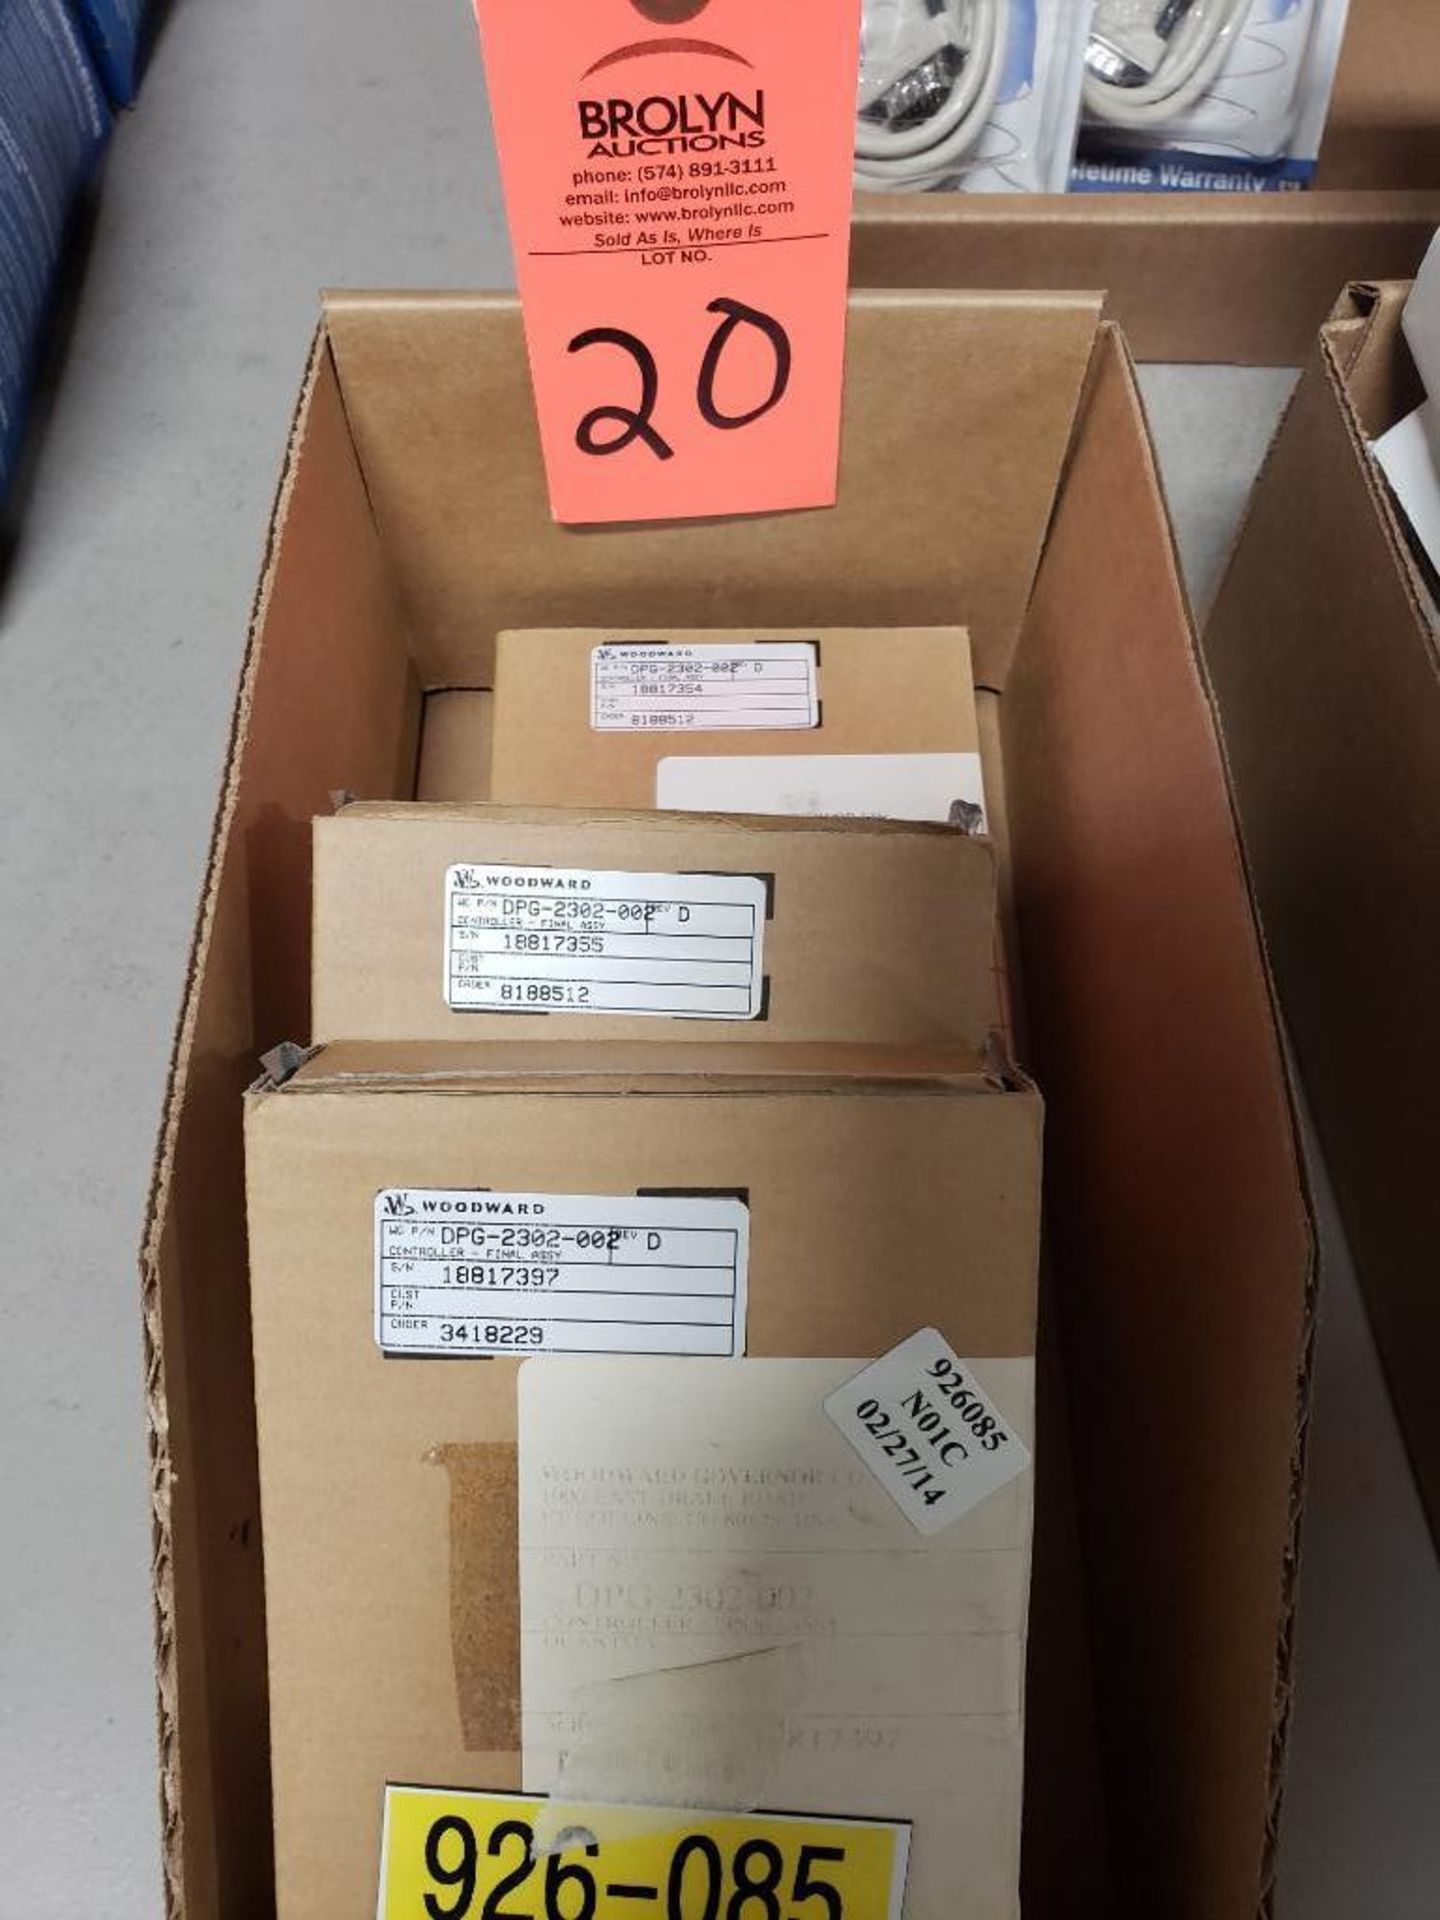 Qty 3 - Woodward part number DPG-2302-002. New in boxes.